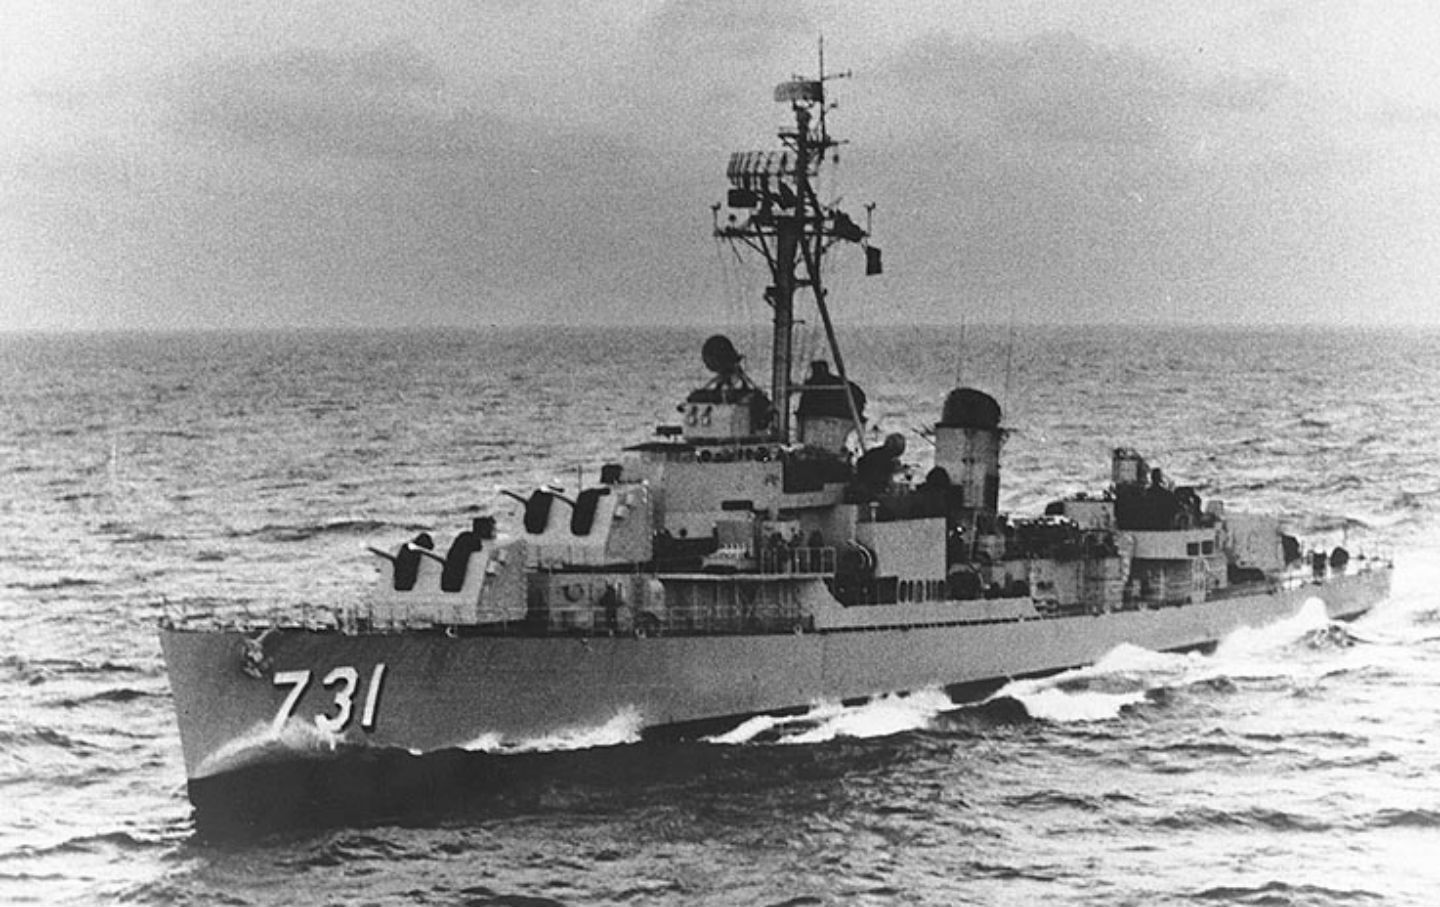 August 4, 1964: The Gulf of Tonkin 'Incident' Sparks American Escalation in Vietnam | The Nation